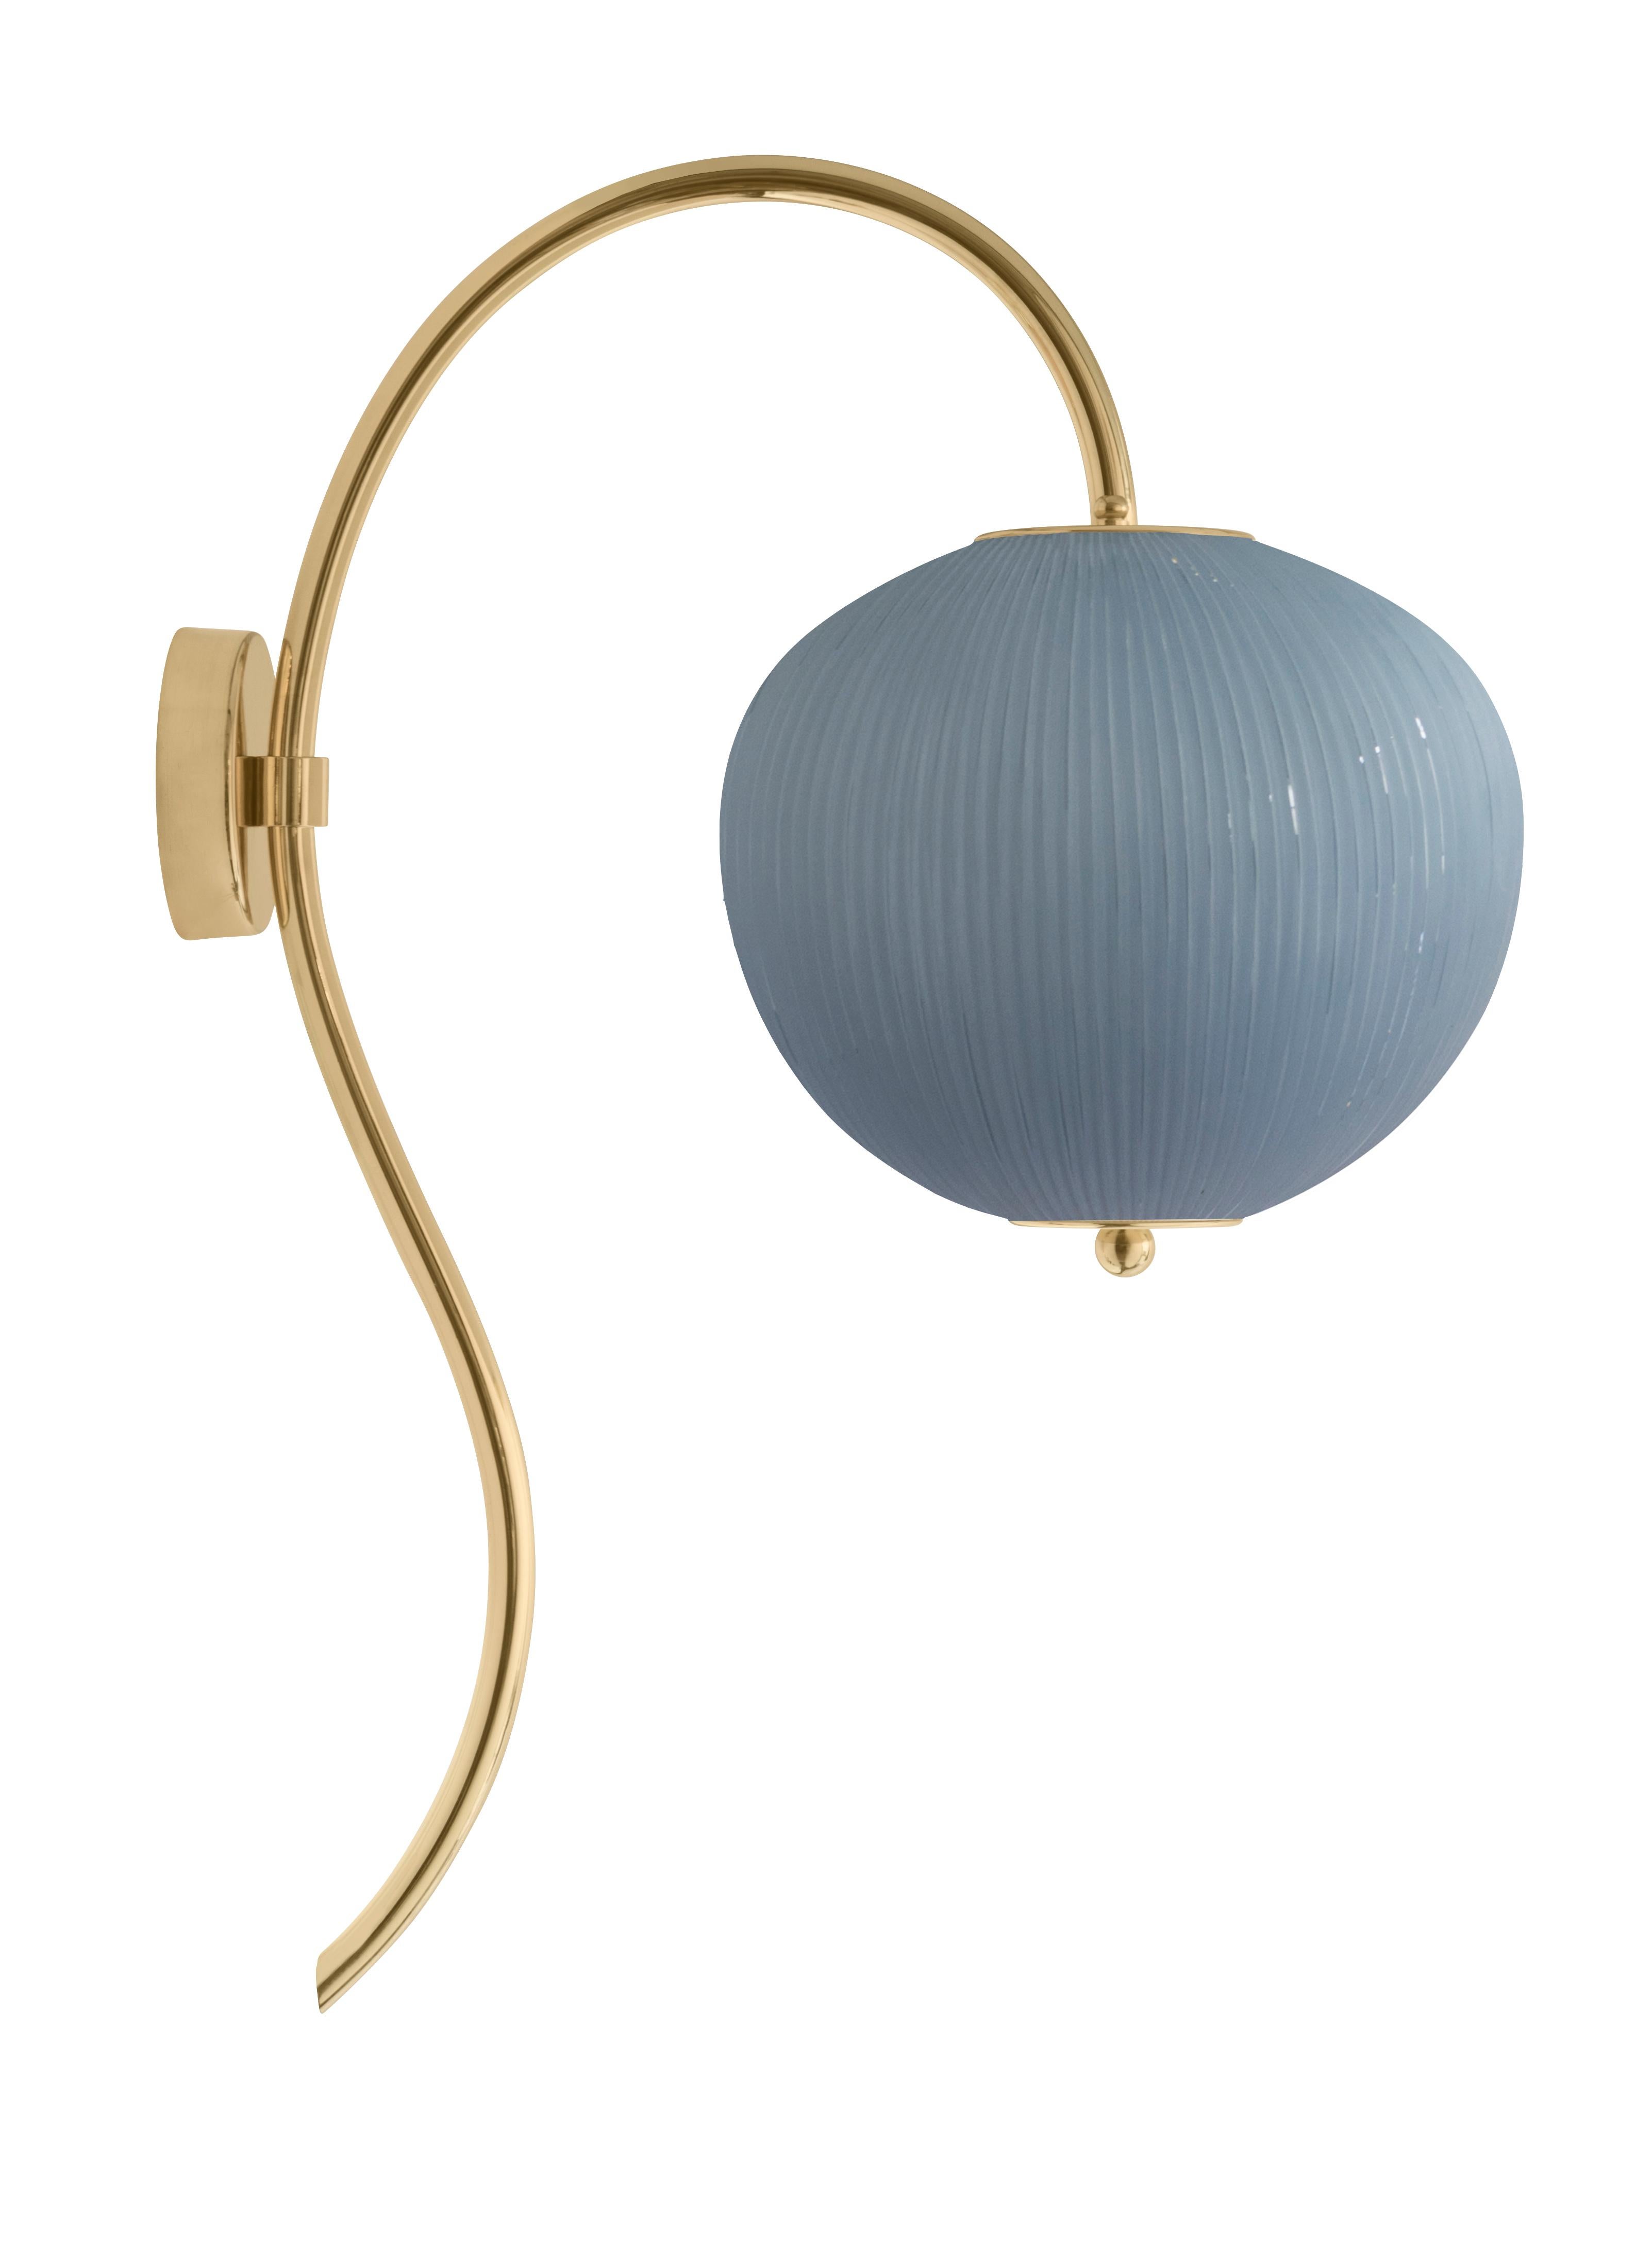 Wall lamp china 03 by Magic Circus Editions
Dimensions: H 62 x W 26.2 x D 41.5 cm
Materials: Brass, mouth blown glass sculpted with a diamond saw
Colour: opal grey

Available finishes: Brass, nickel
Available colours: enamel soft white, soft